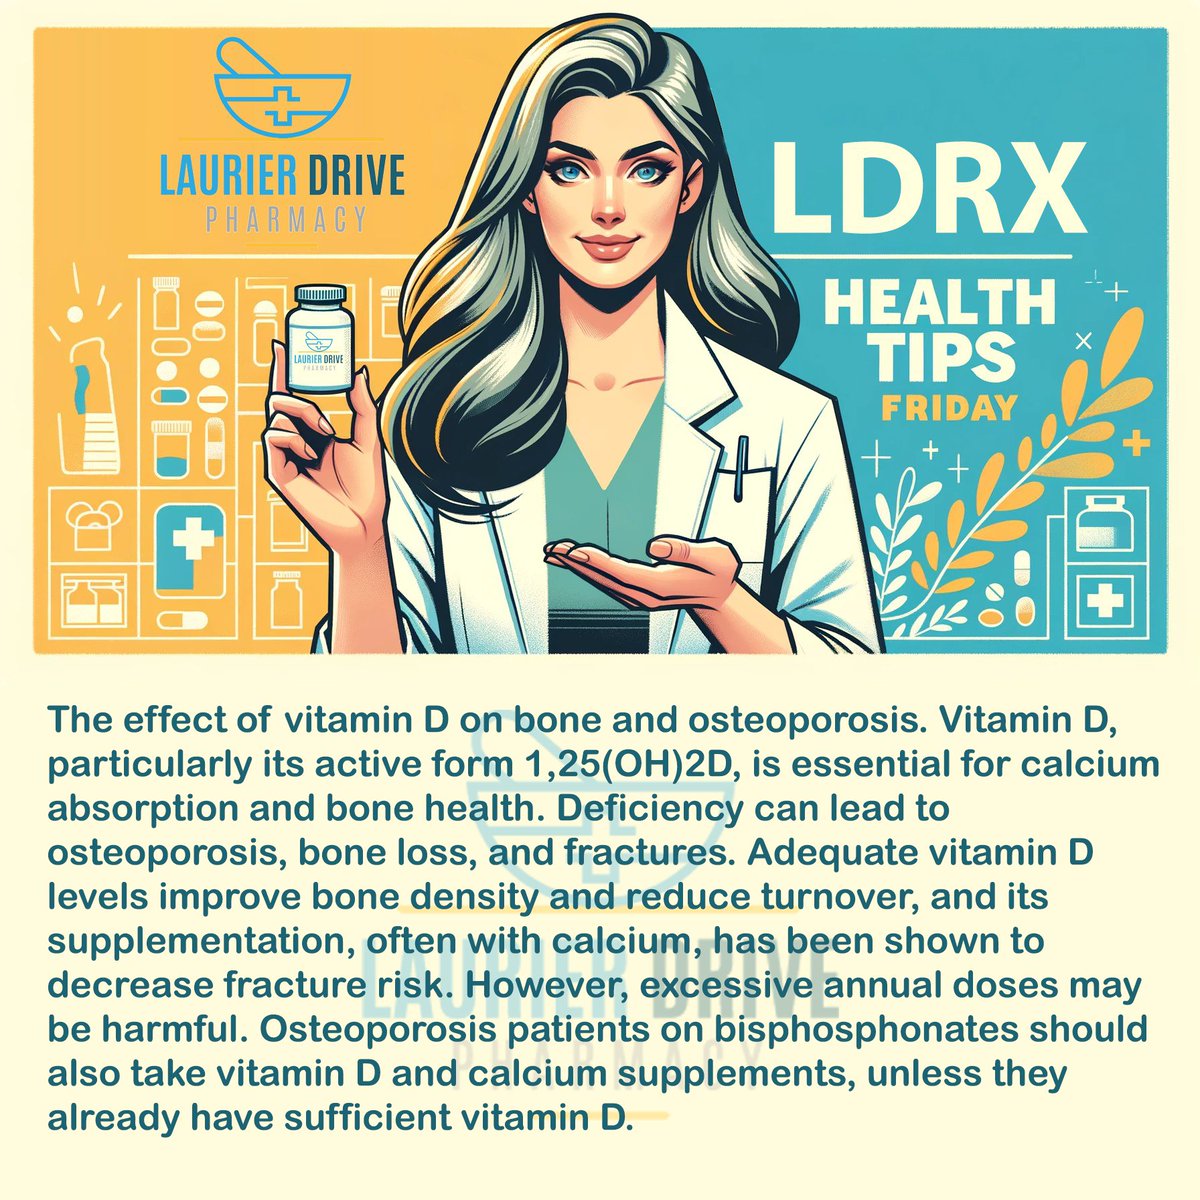 LDRX Health Tips Friday! Vitamin D plays a crucial role in calcium absorption, vital for strong bones & preventing osteoporosis. Sunlight is a great source, but supplements help in winter. Ask us for the best options! #BoneHealth #VitaminD #Osteoporosis #Pharmacy